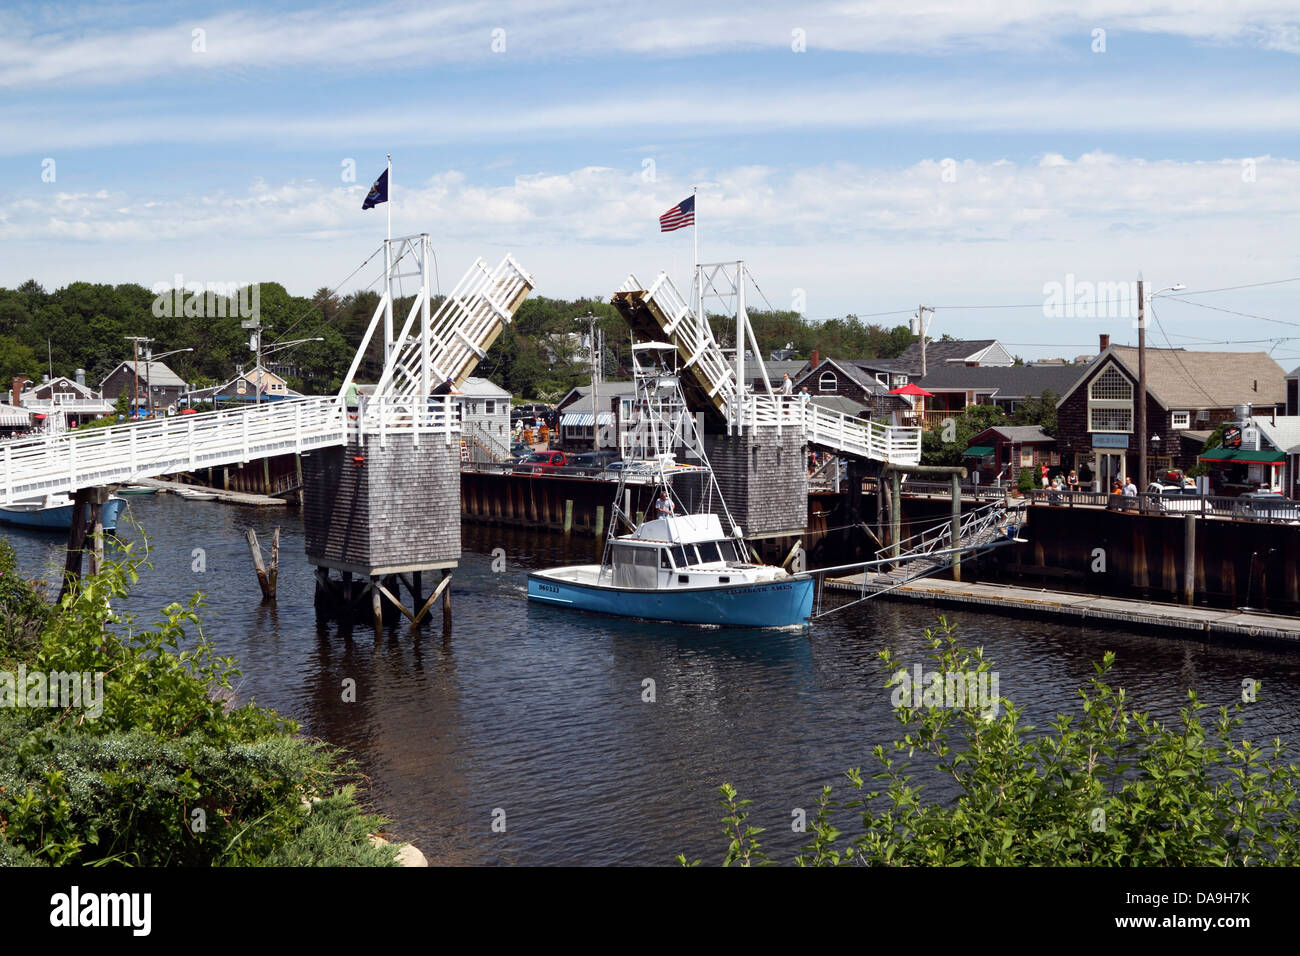 Boats passing under the open drawbridge at Perkins Cove, Ogunquit, Maine, USA. Oginquit is a popular New England vacation destination Stock Photo